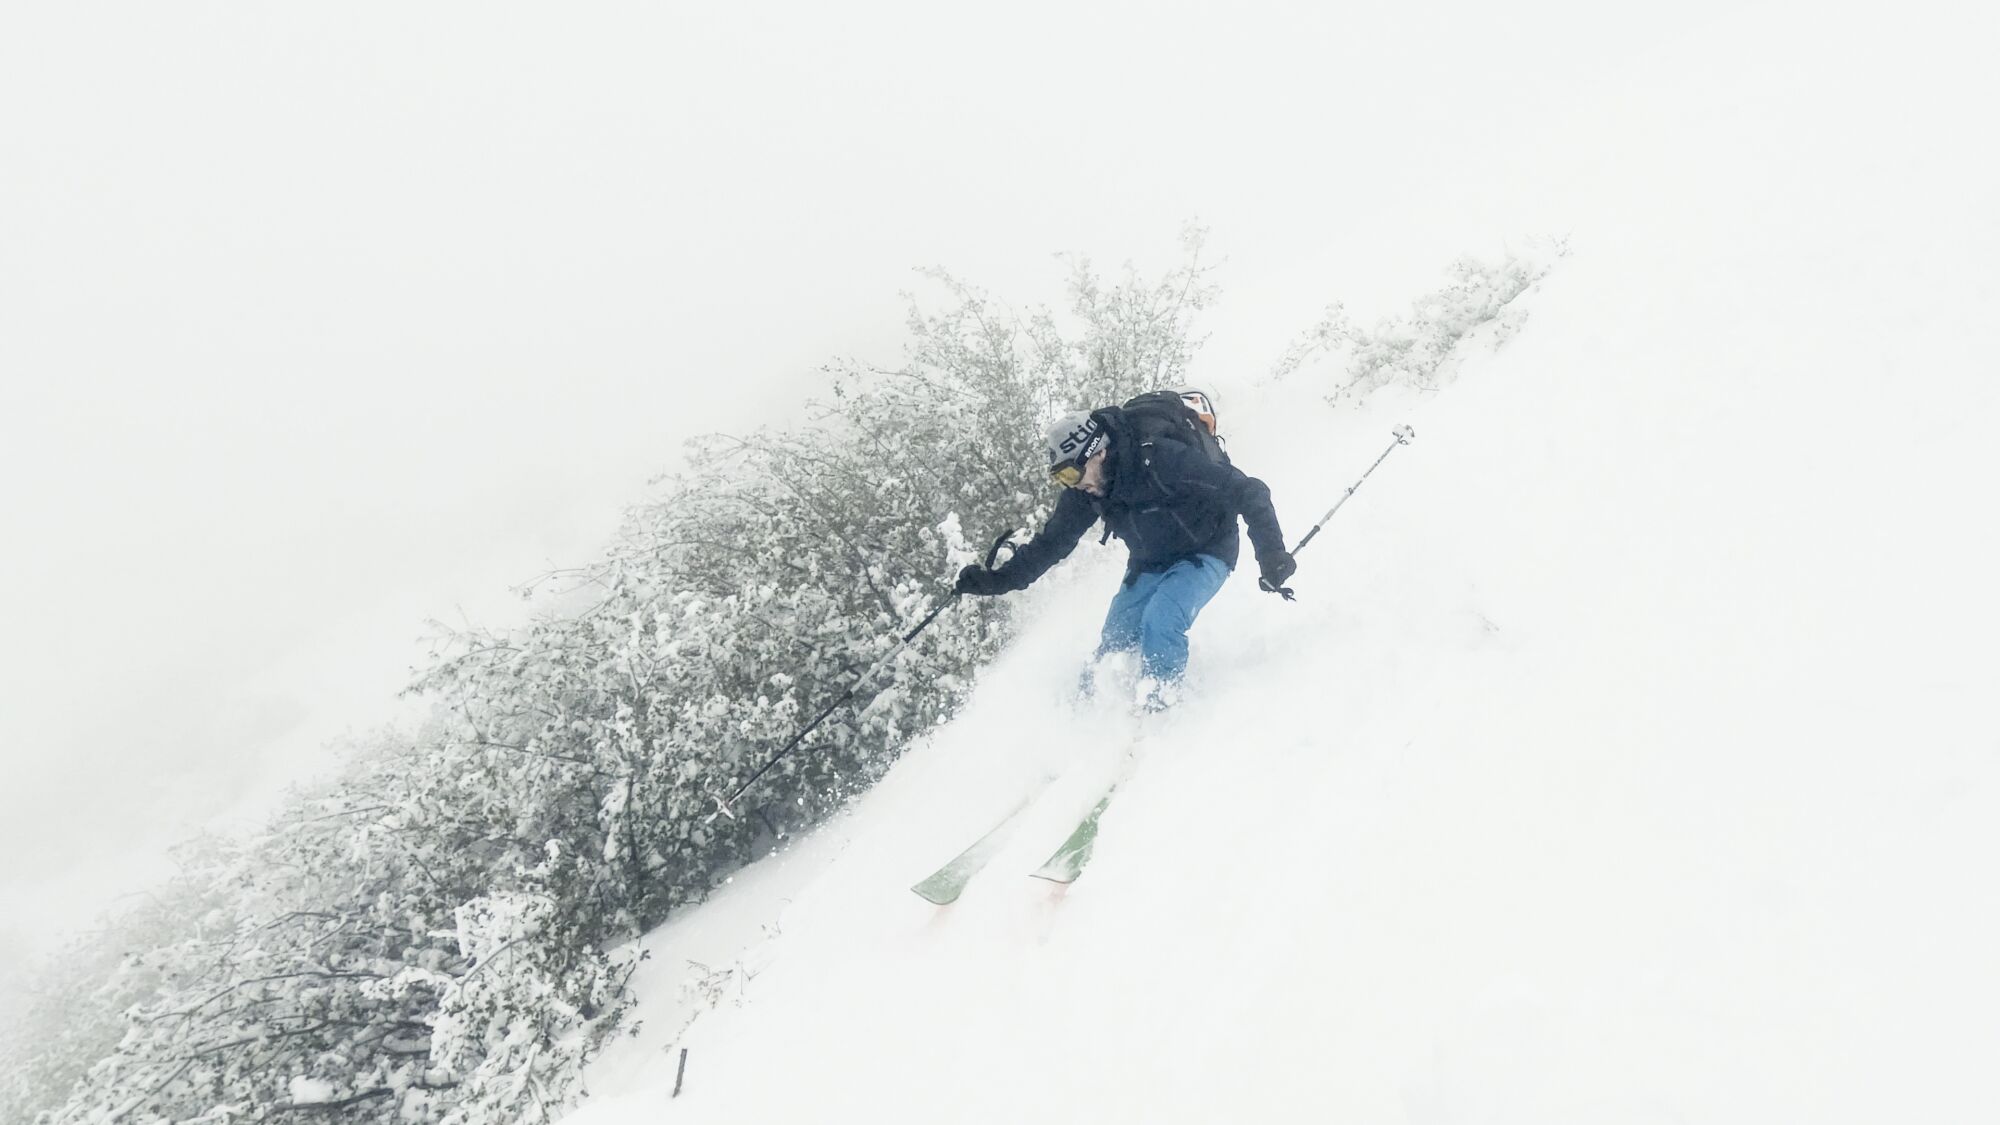 Matthew Testa skis down the west face of Mt. Lukens in white-out conditions.